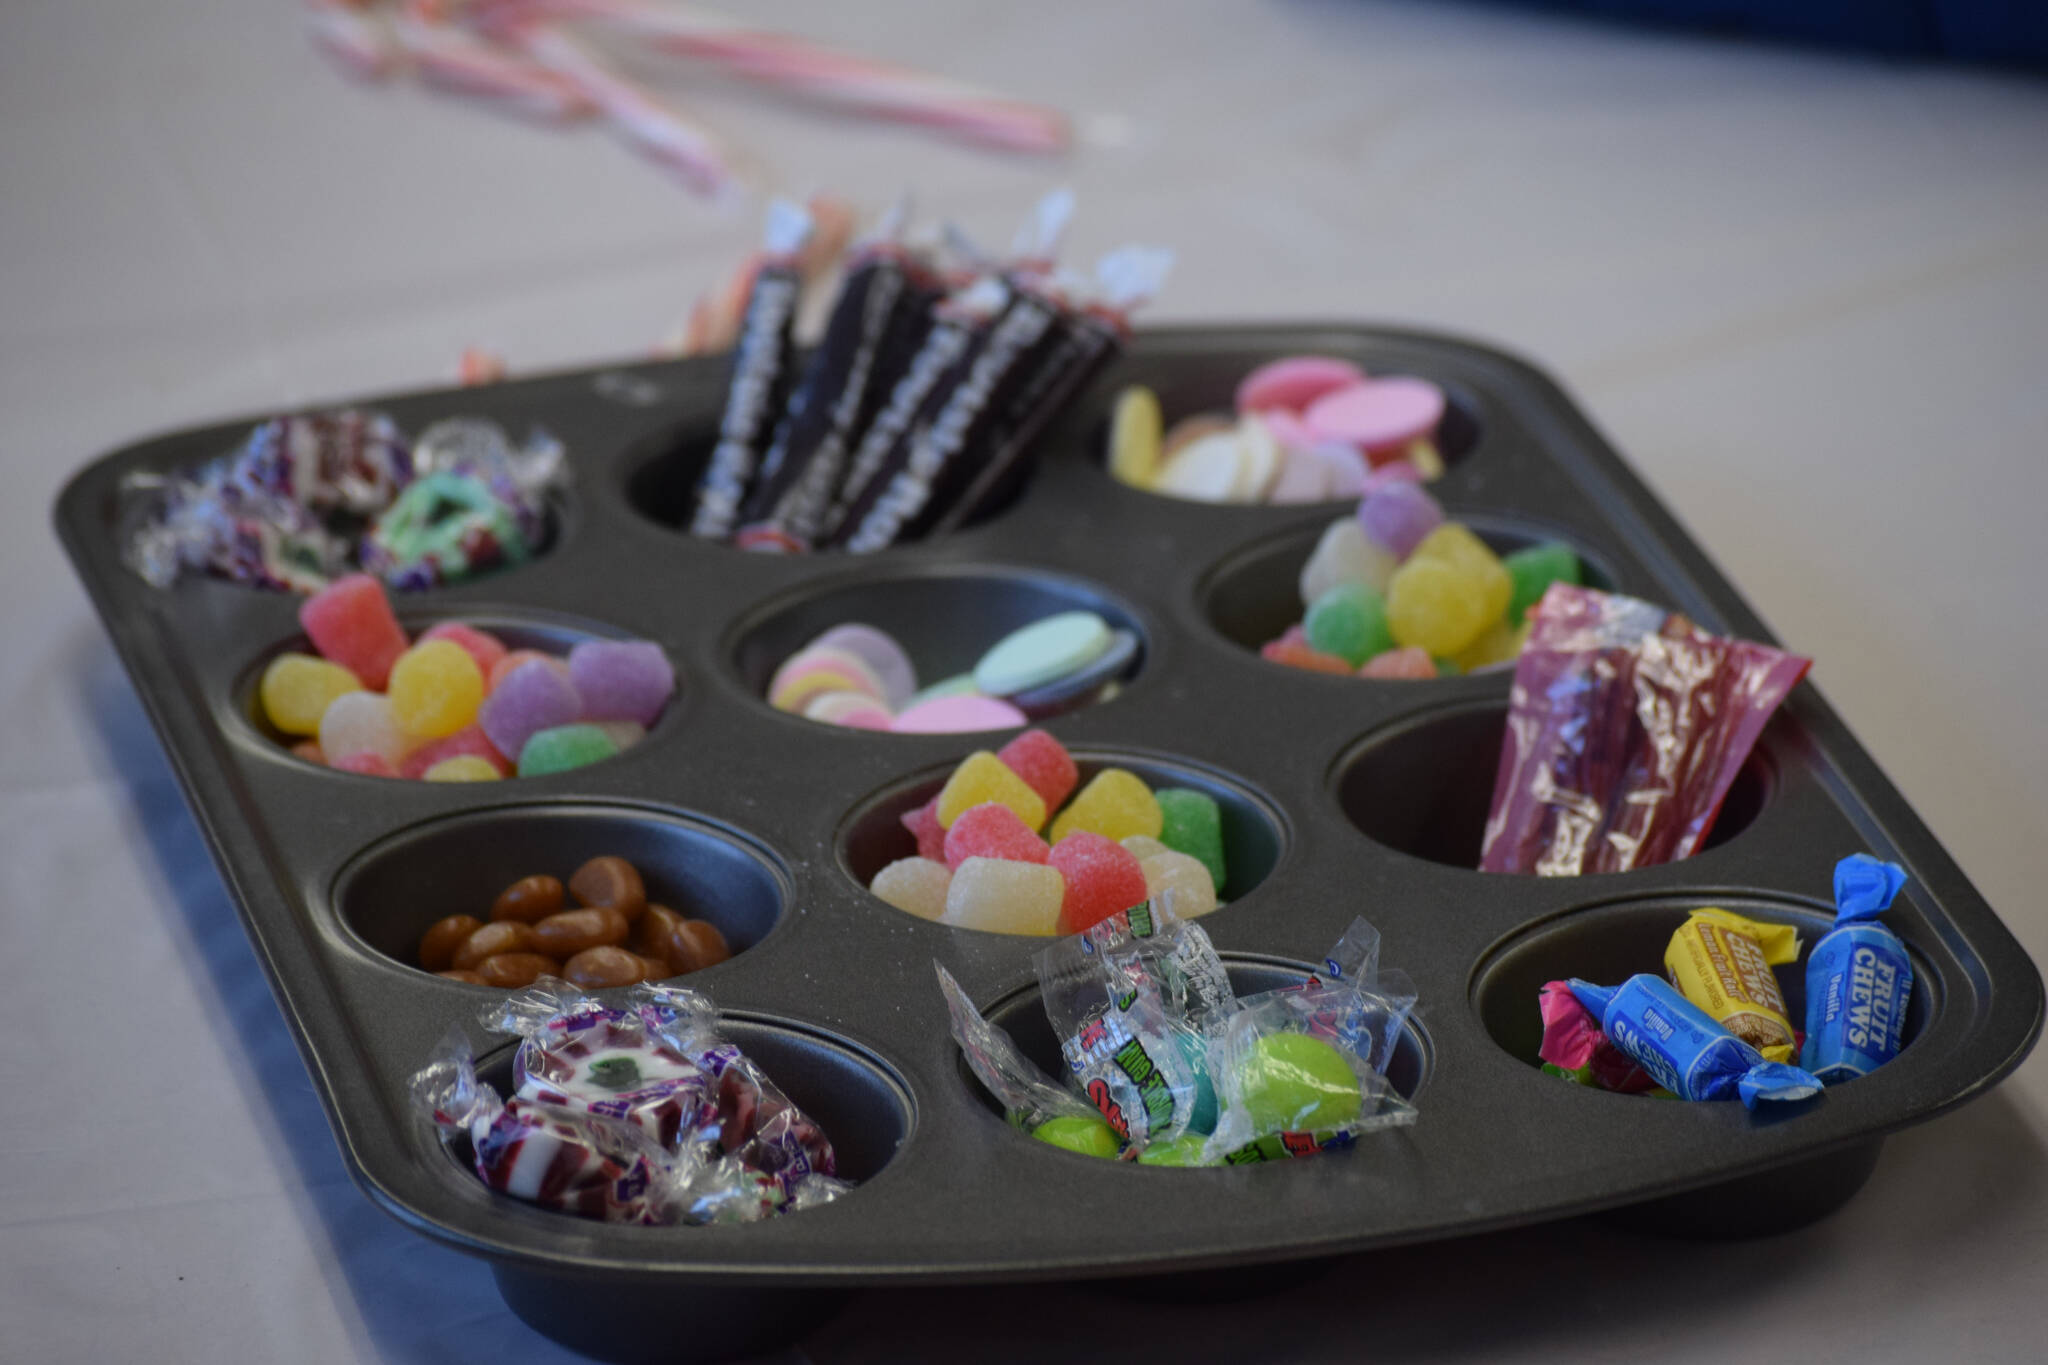 An array of sweets were used by kids making homemade gingerbread houses at the Nikiski Community Recreation Center on Saturday, Dec. 11, 2021, in Nikiski, Alaska. (Camille Botello/Peninsula Clarion)